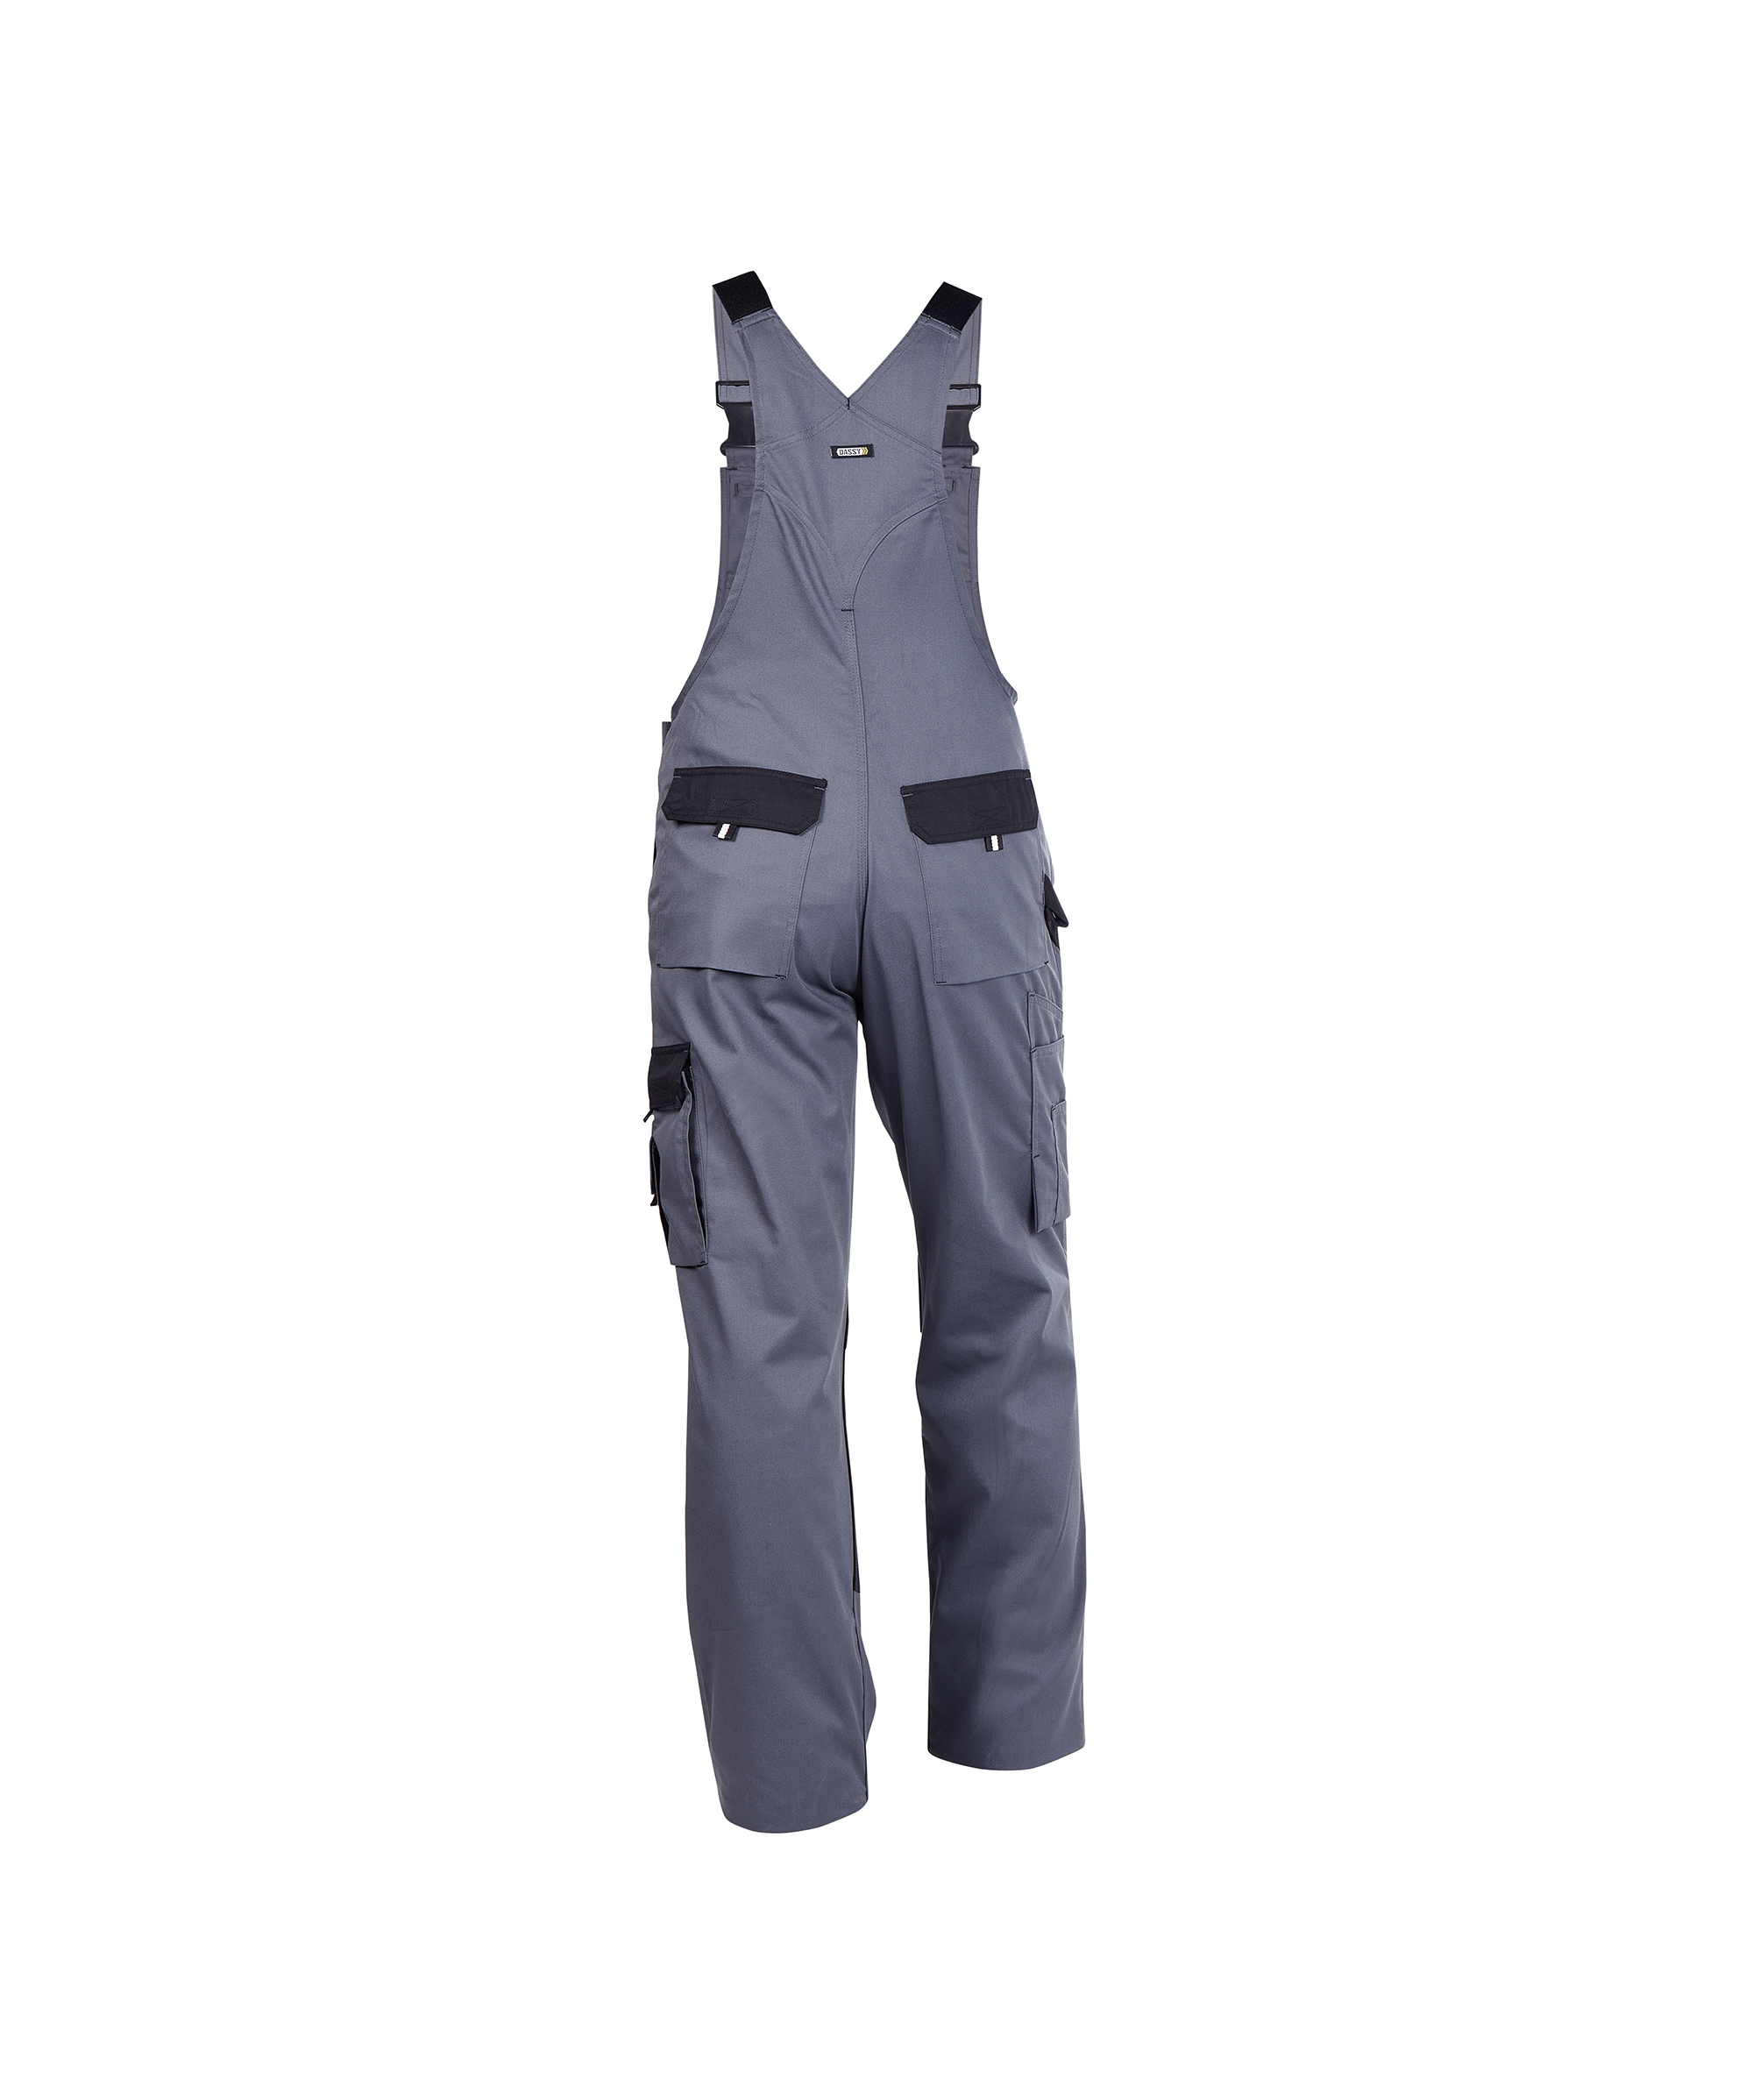 versailles_two-tone-brace-overall-with-knee-pockets_cement-grey-black_back.jpg